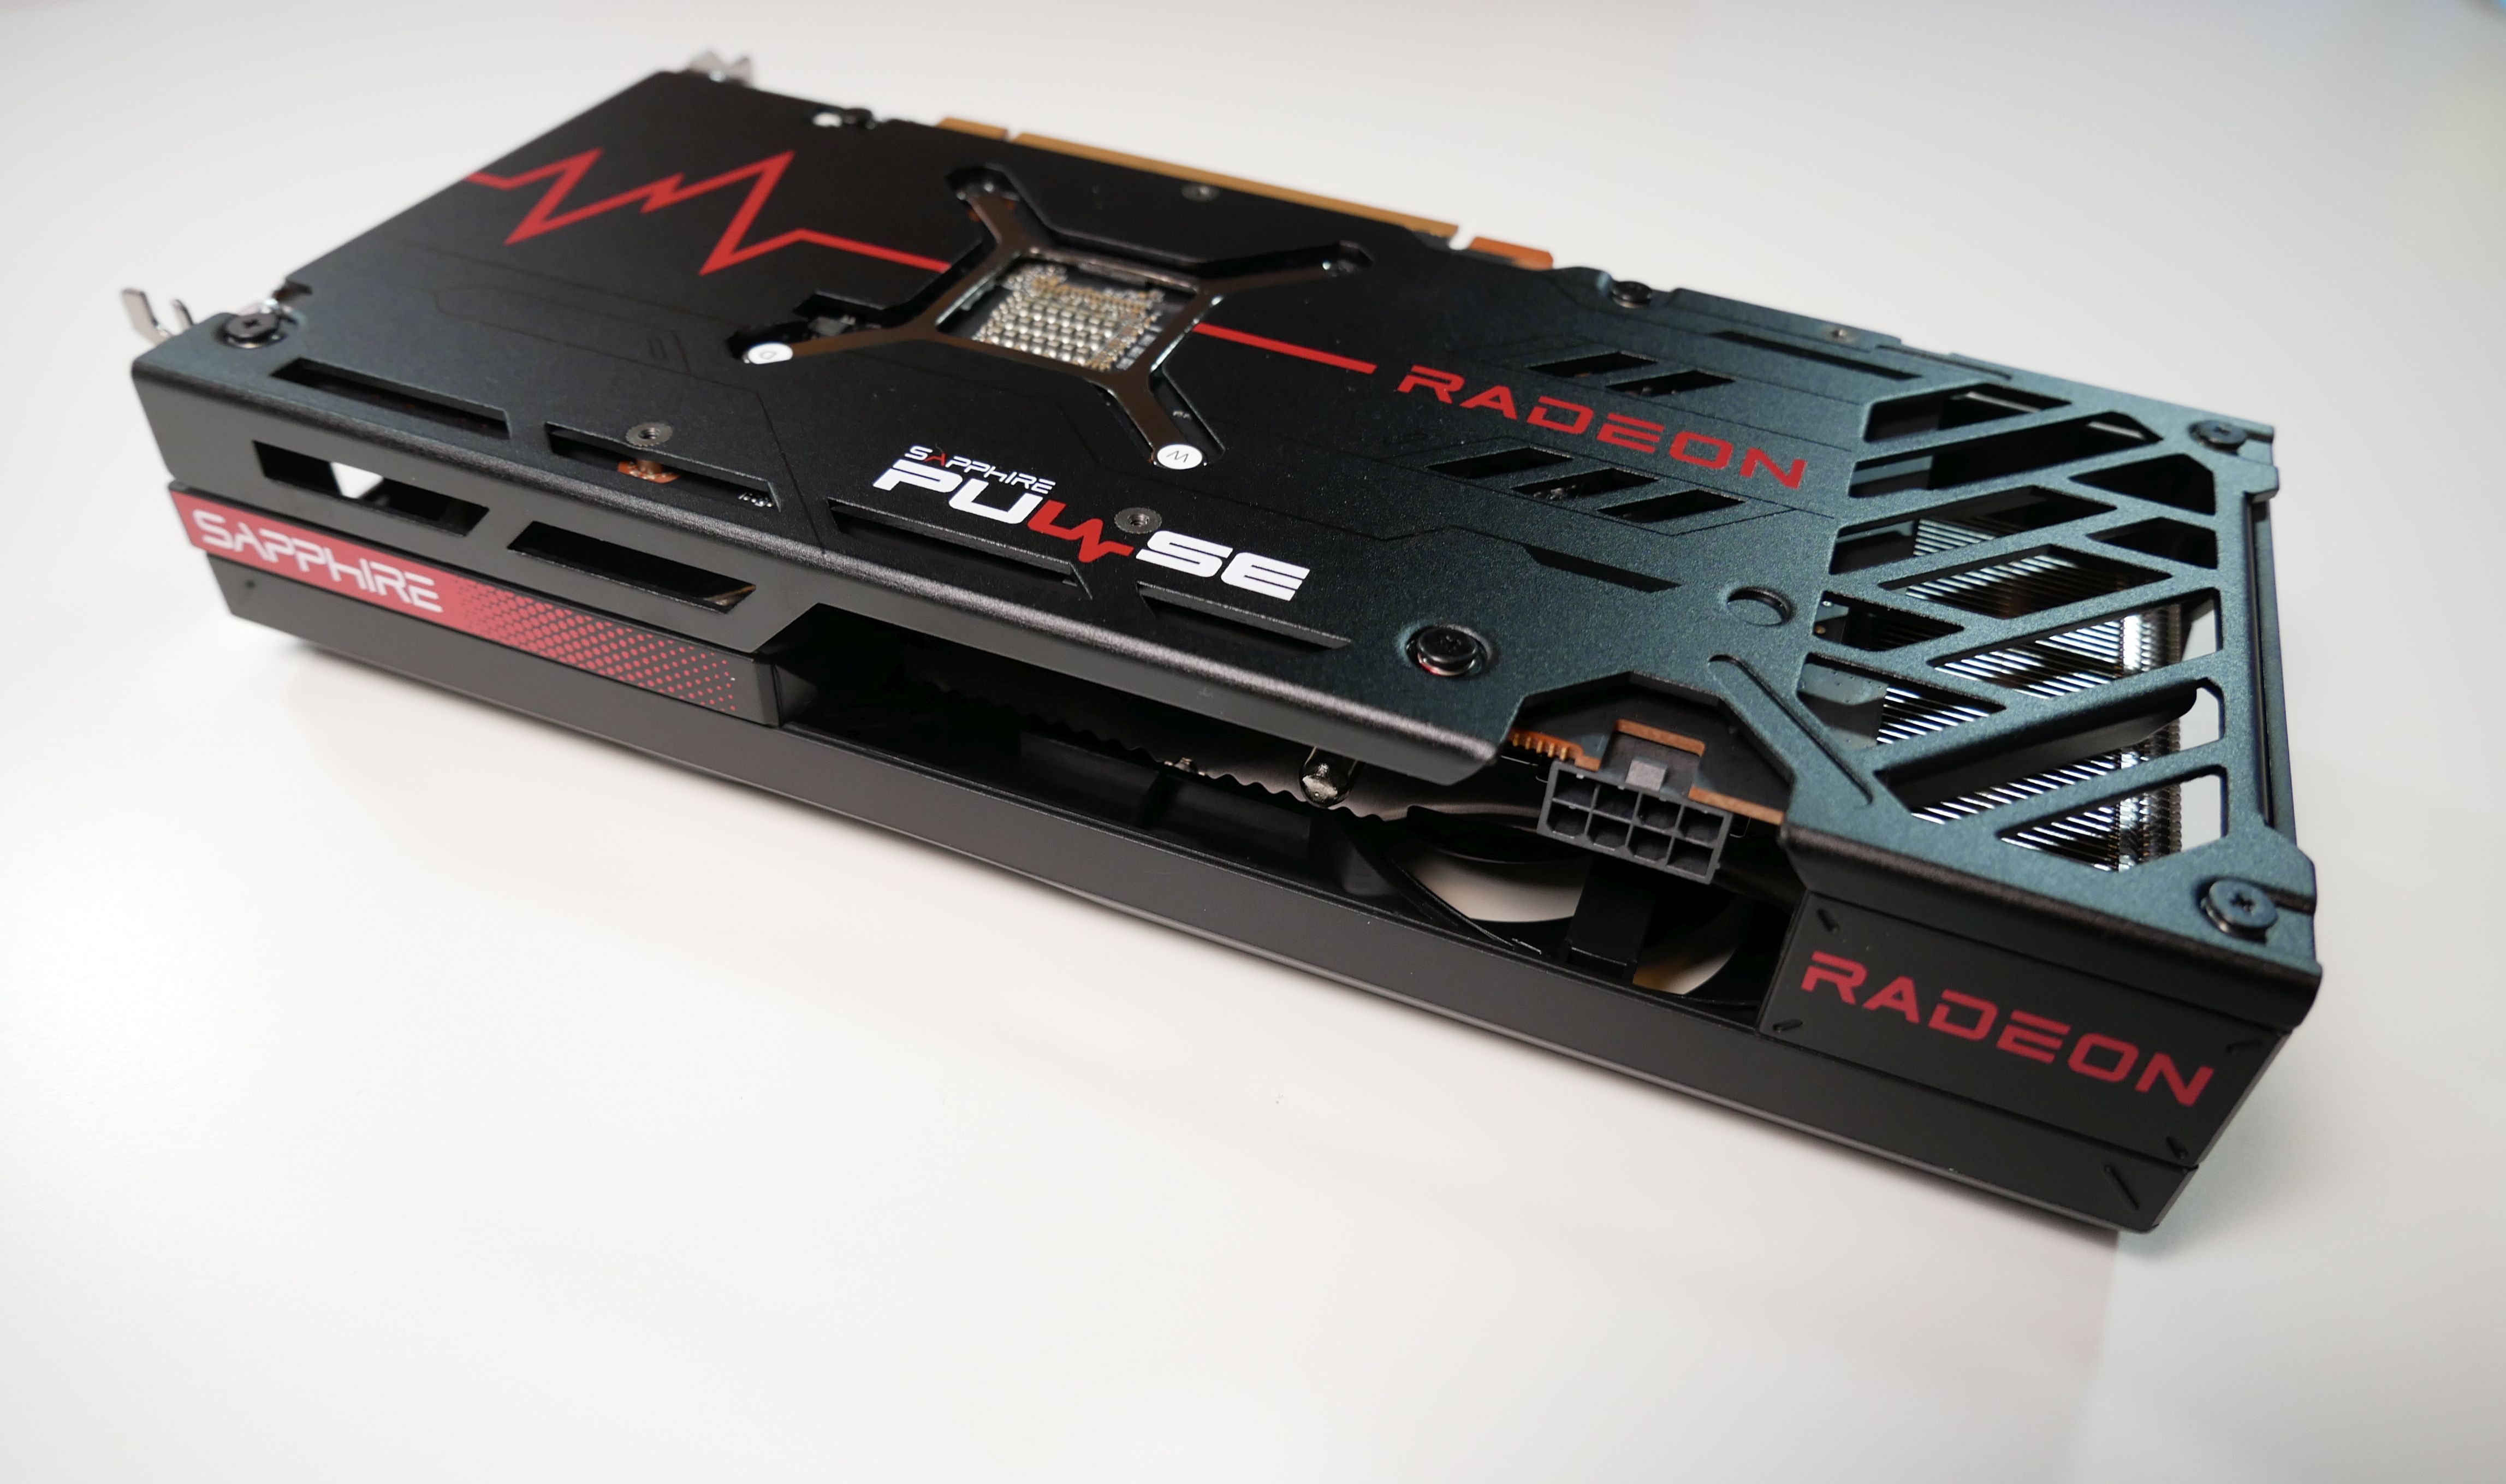 Sapphire Pulse Radeon RX 7600 review: Cool, quiet, and compelling